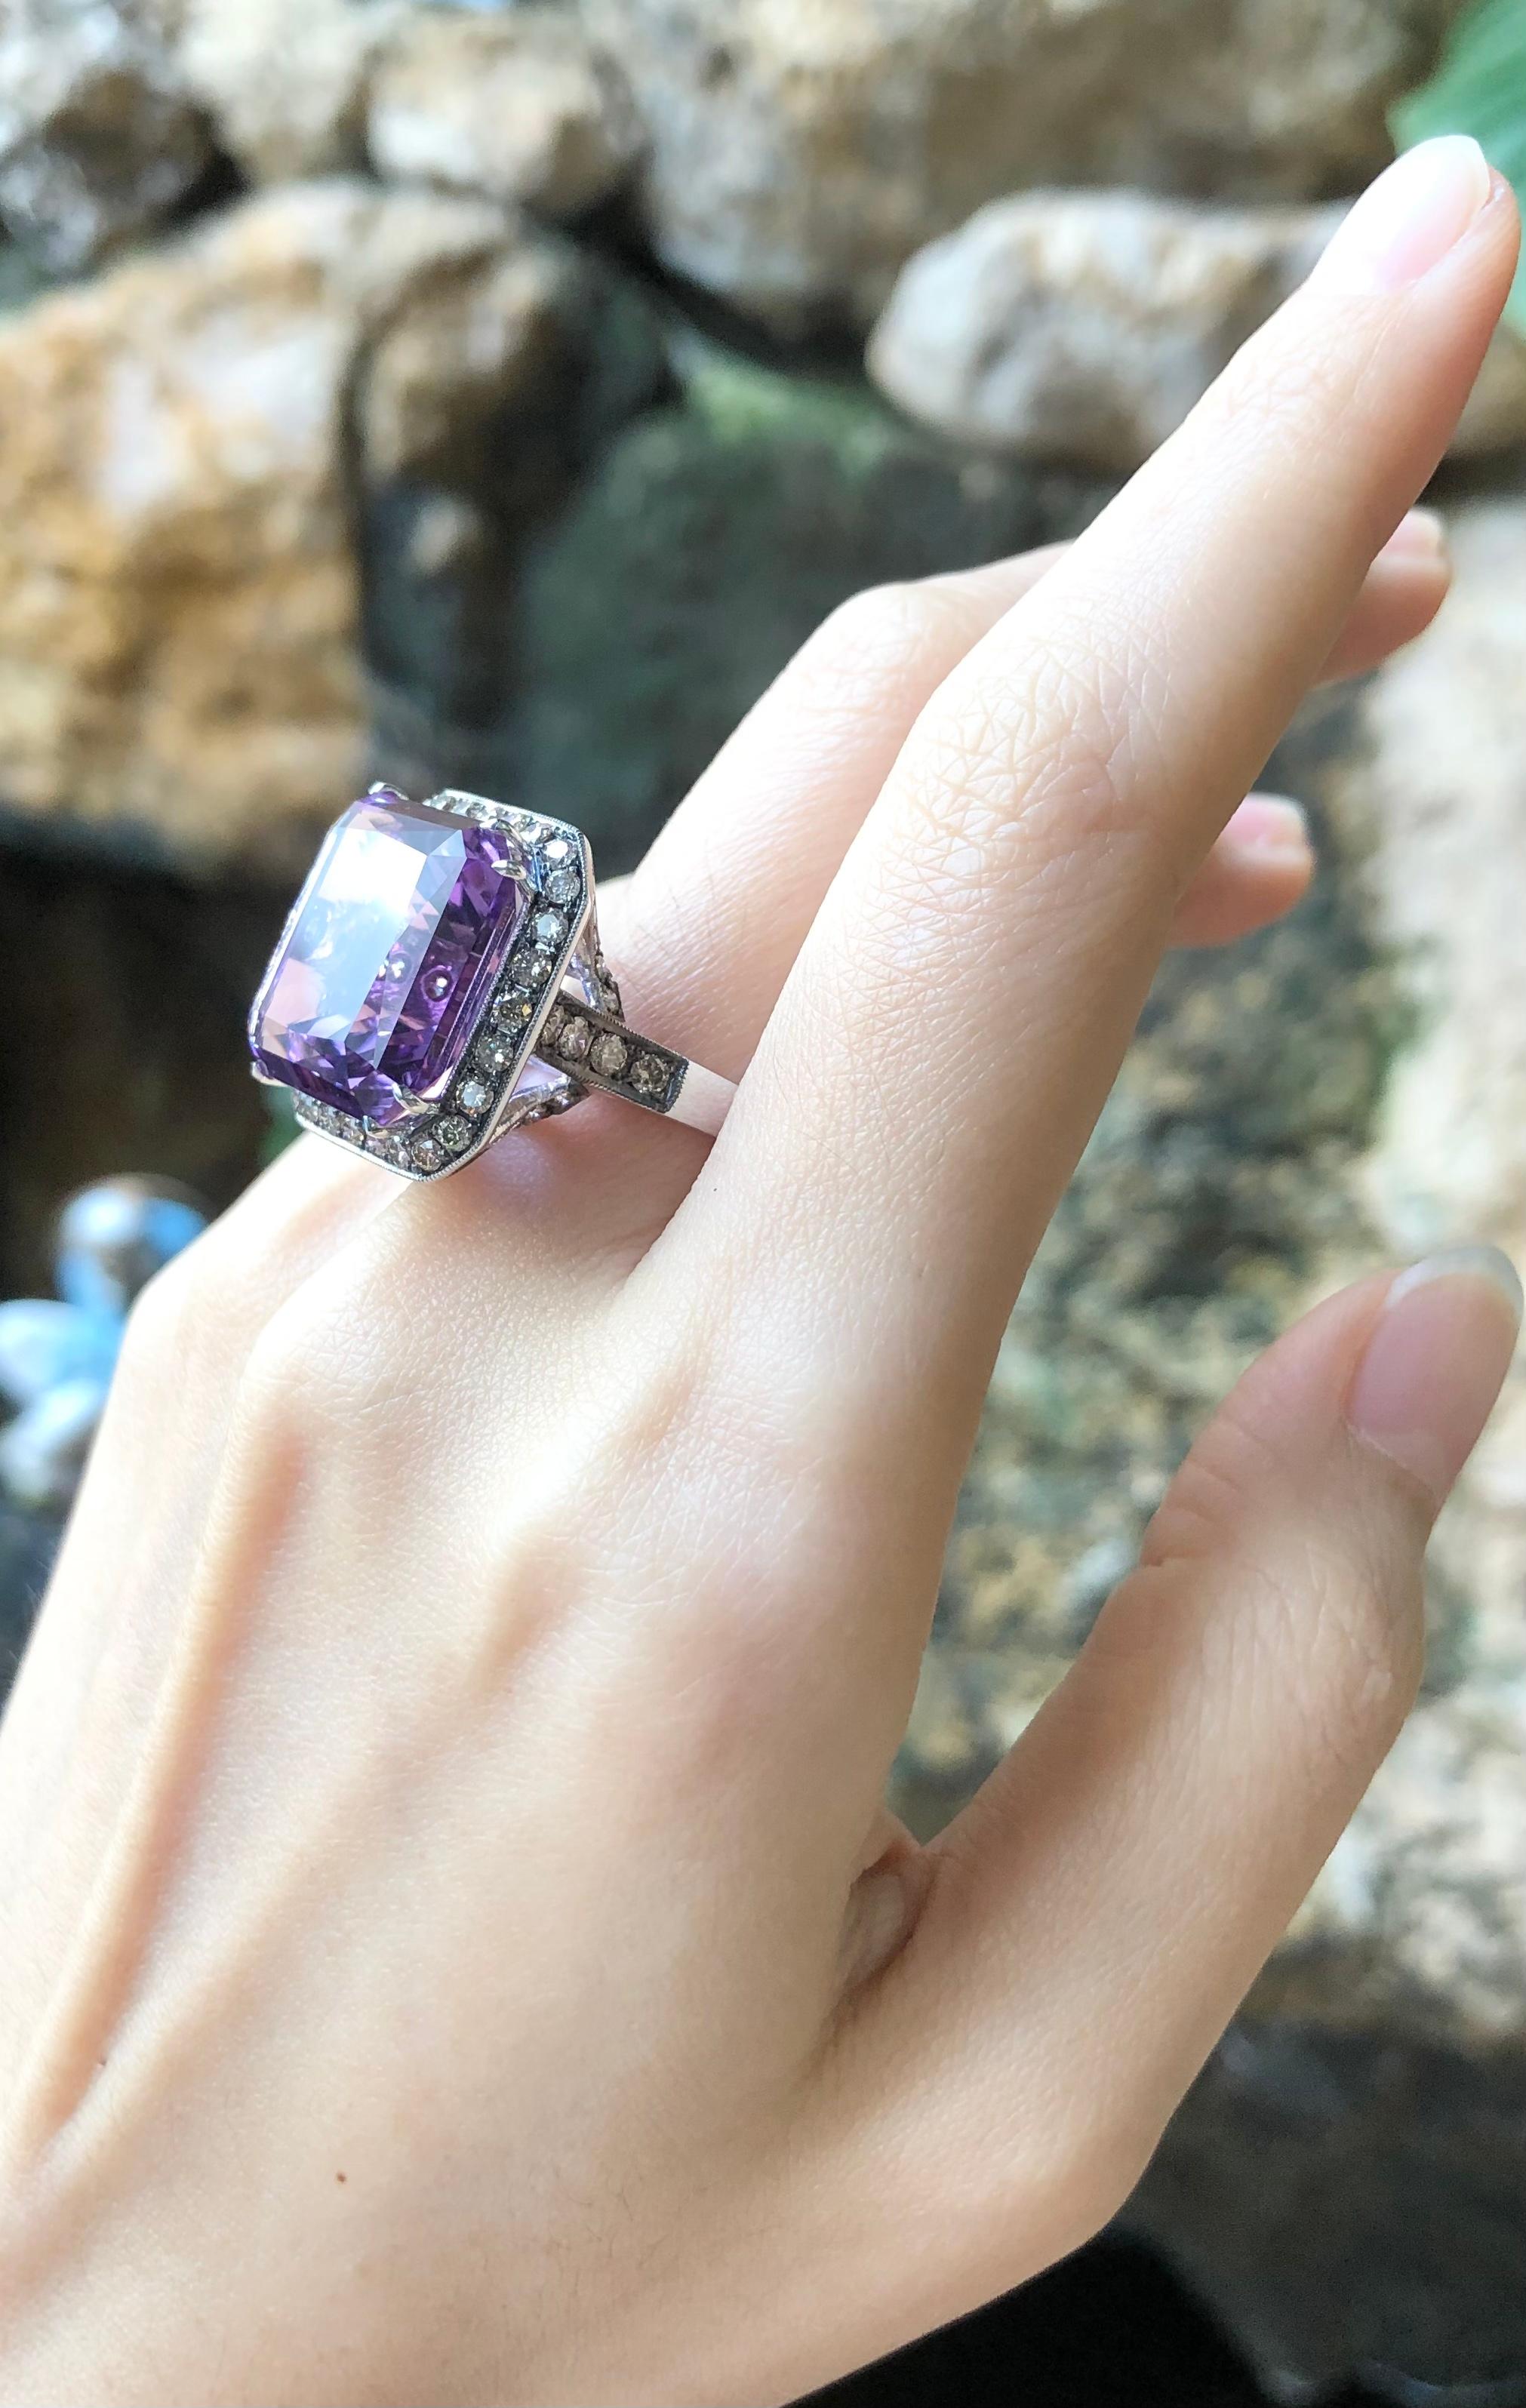 Amethyst 22.20 carats with Brown Diamond 1.93 carats Ring set in 18 Karat White Gold Settings

Width:  2.0 cm 
Length: 2.0 cm
Ring Size: 52
Total Weight: 16.08 grams

